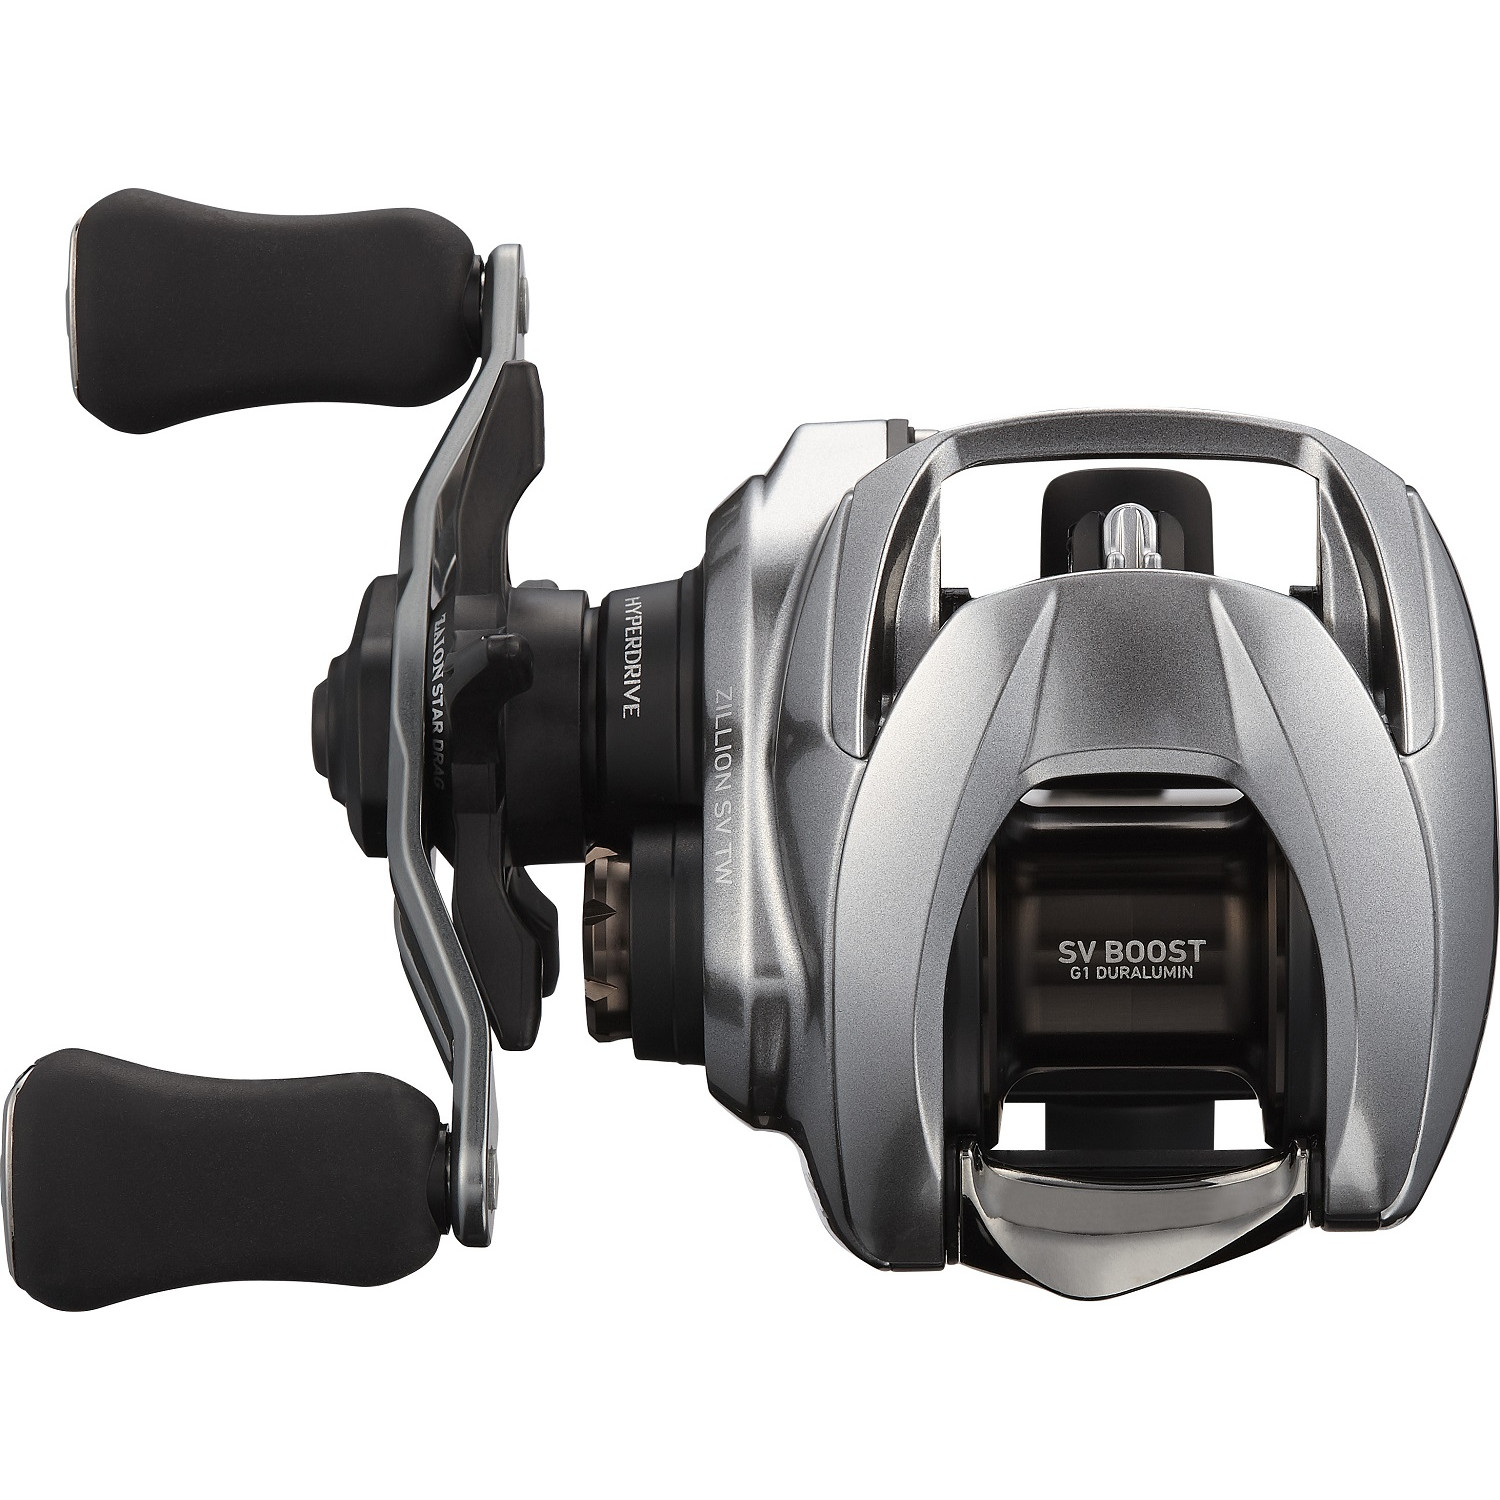 Daiwa Zillion SV TW 20 Question - Fishing Rods, Reels, Line, and